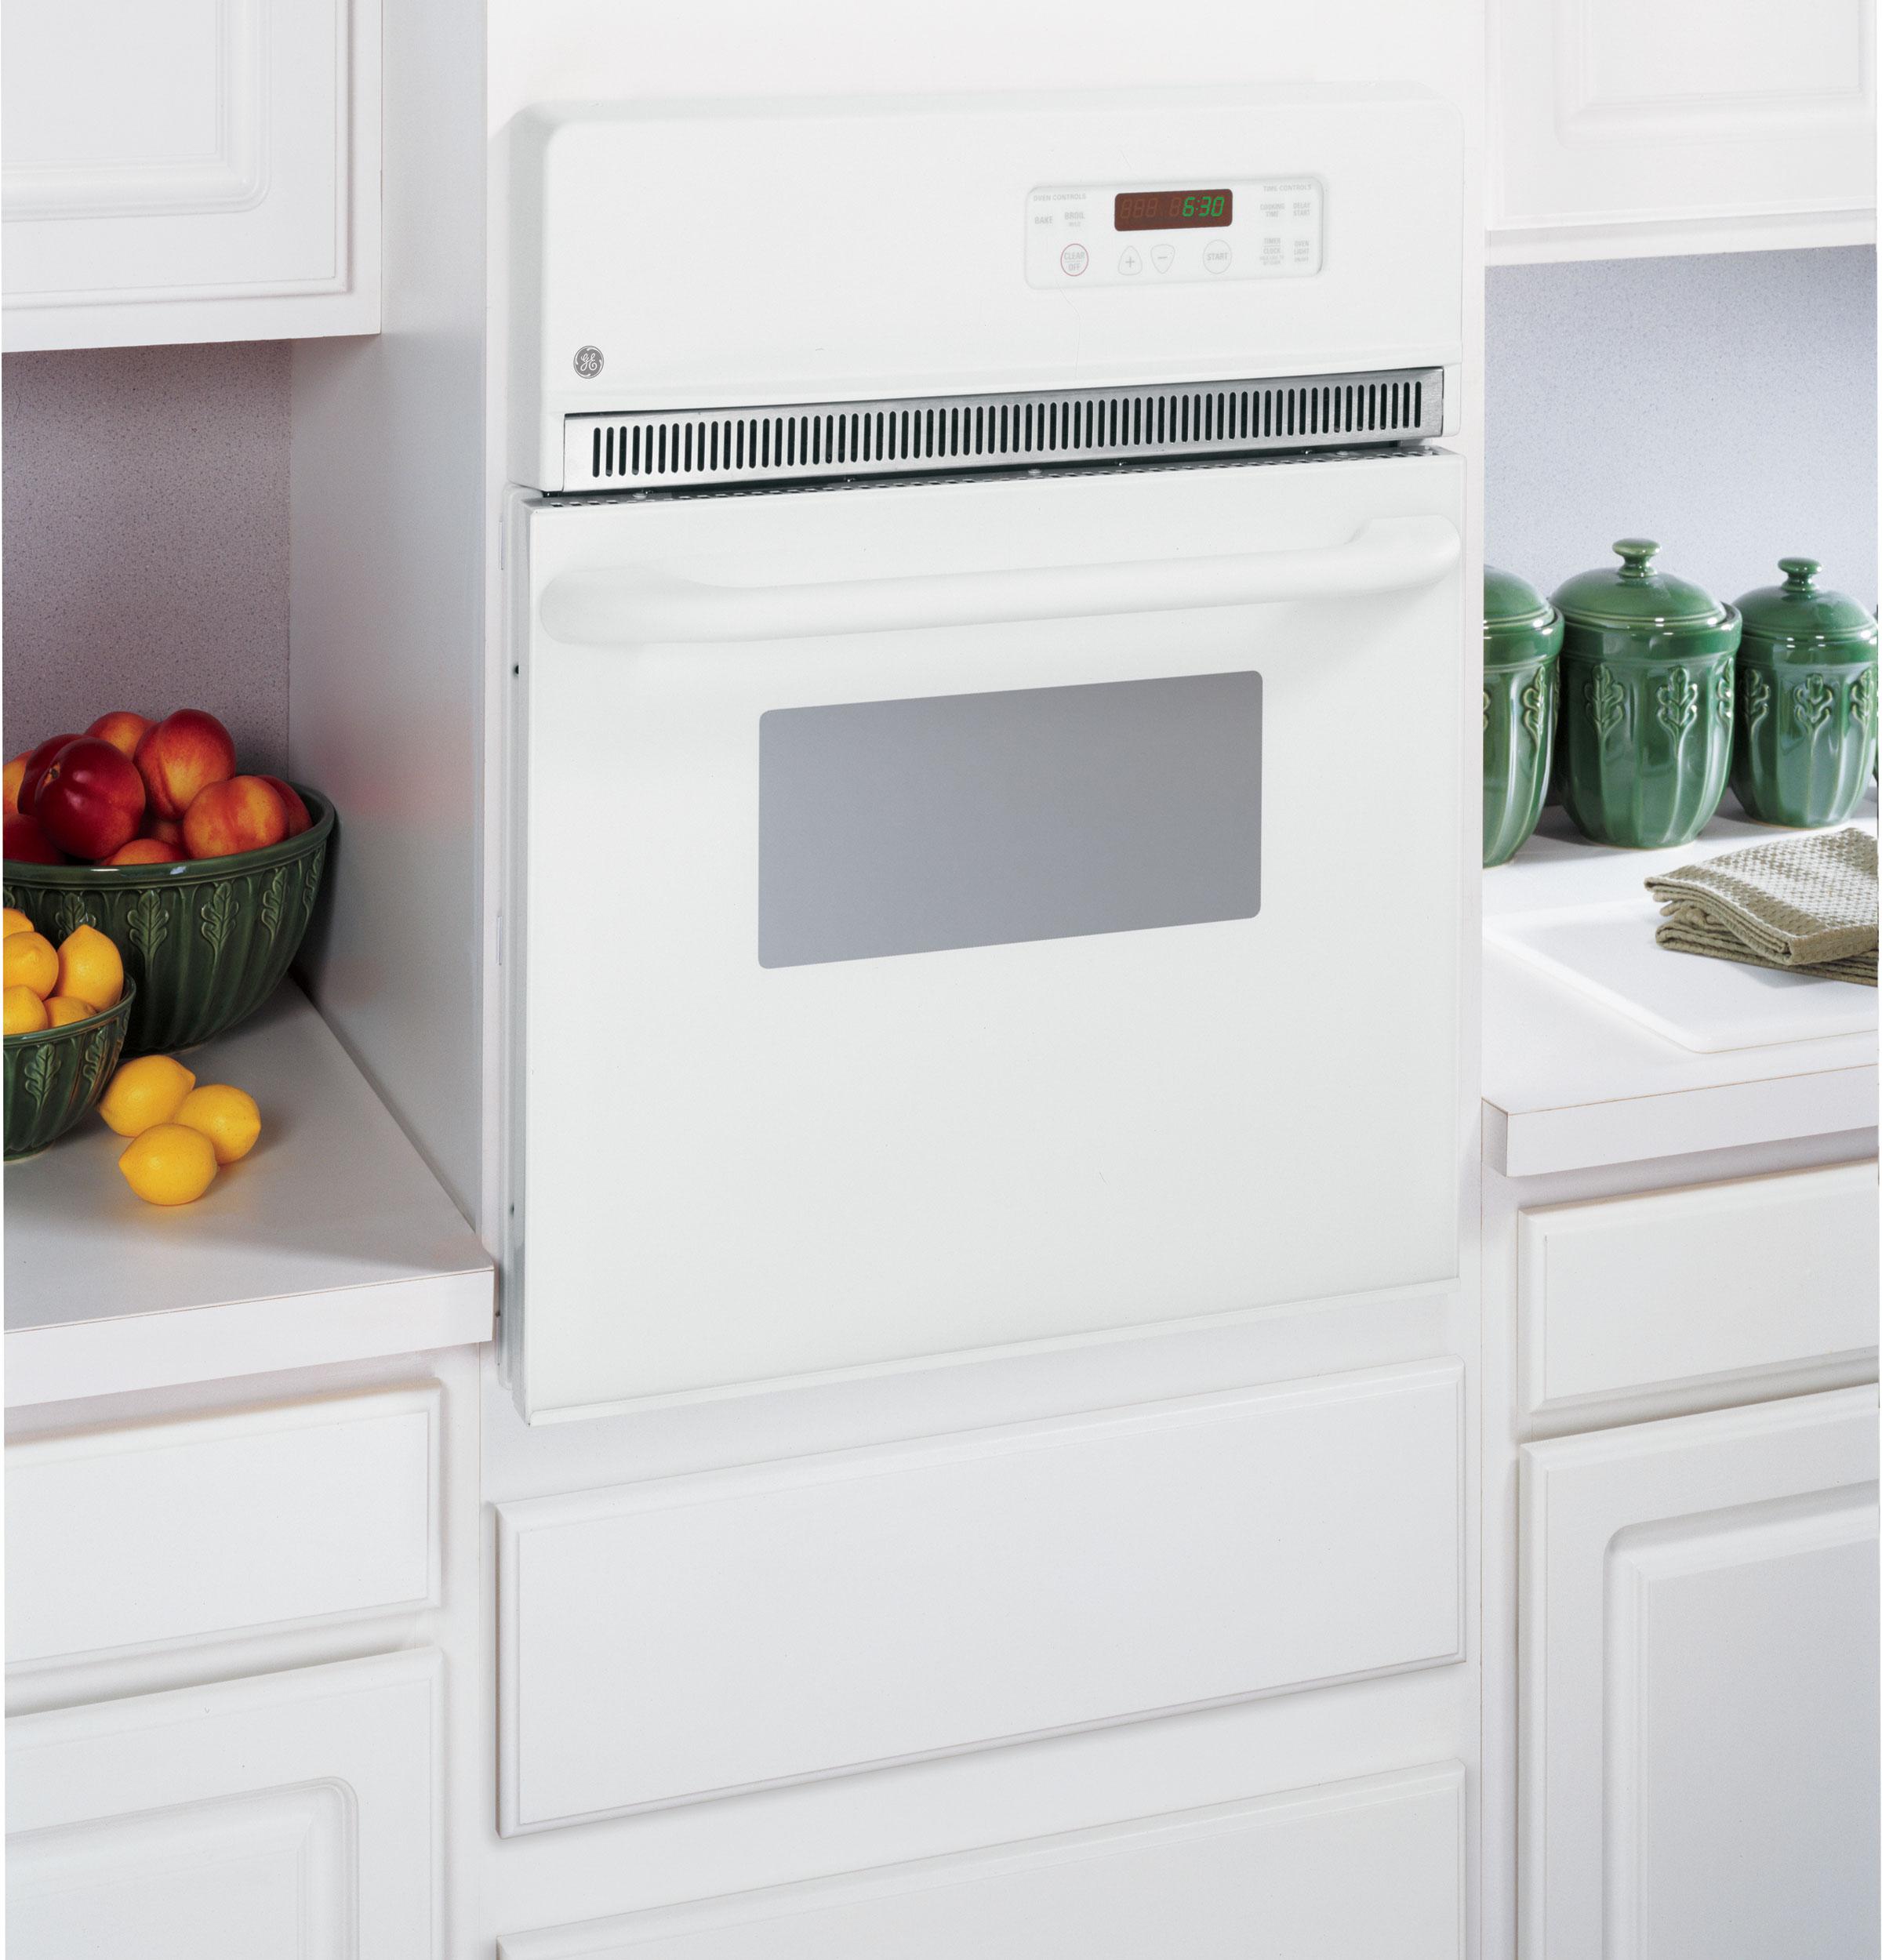 GE® 24" Electric Single Self-Cleaning Wall Oven